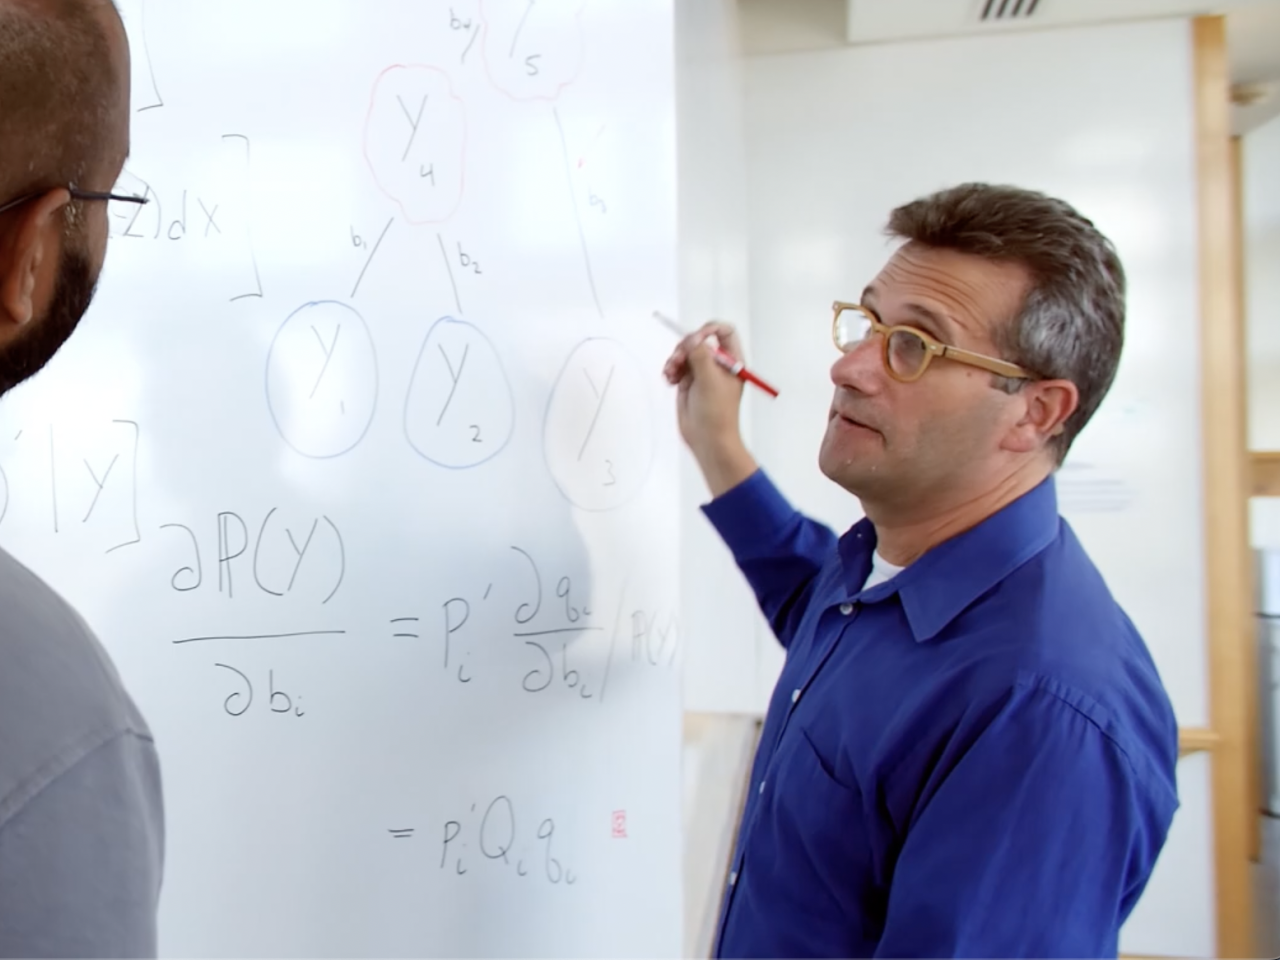 Two people working equations on whiteboard